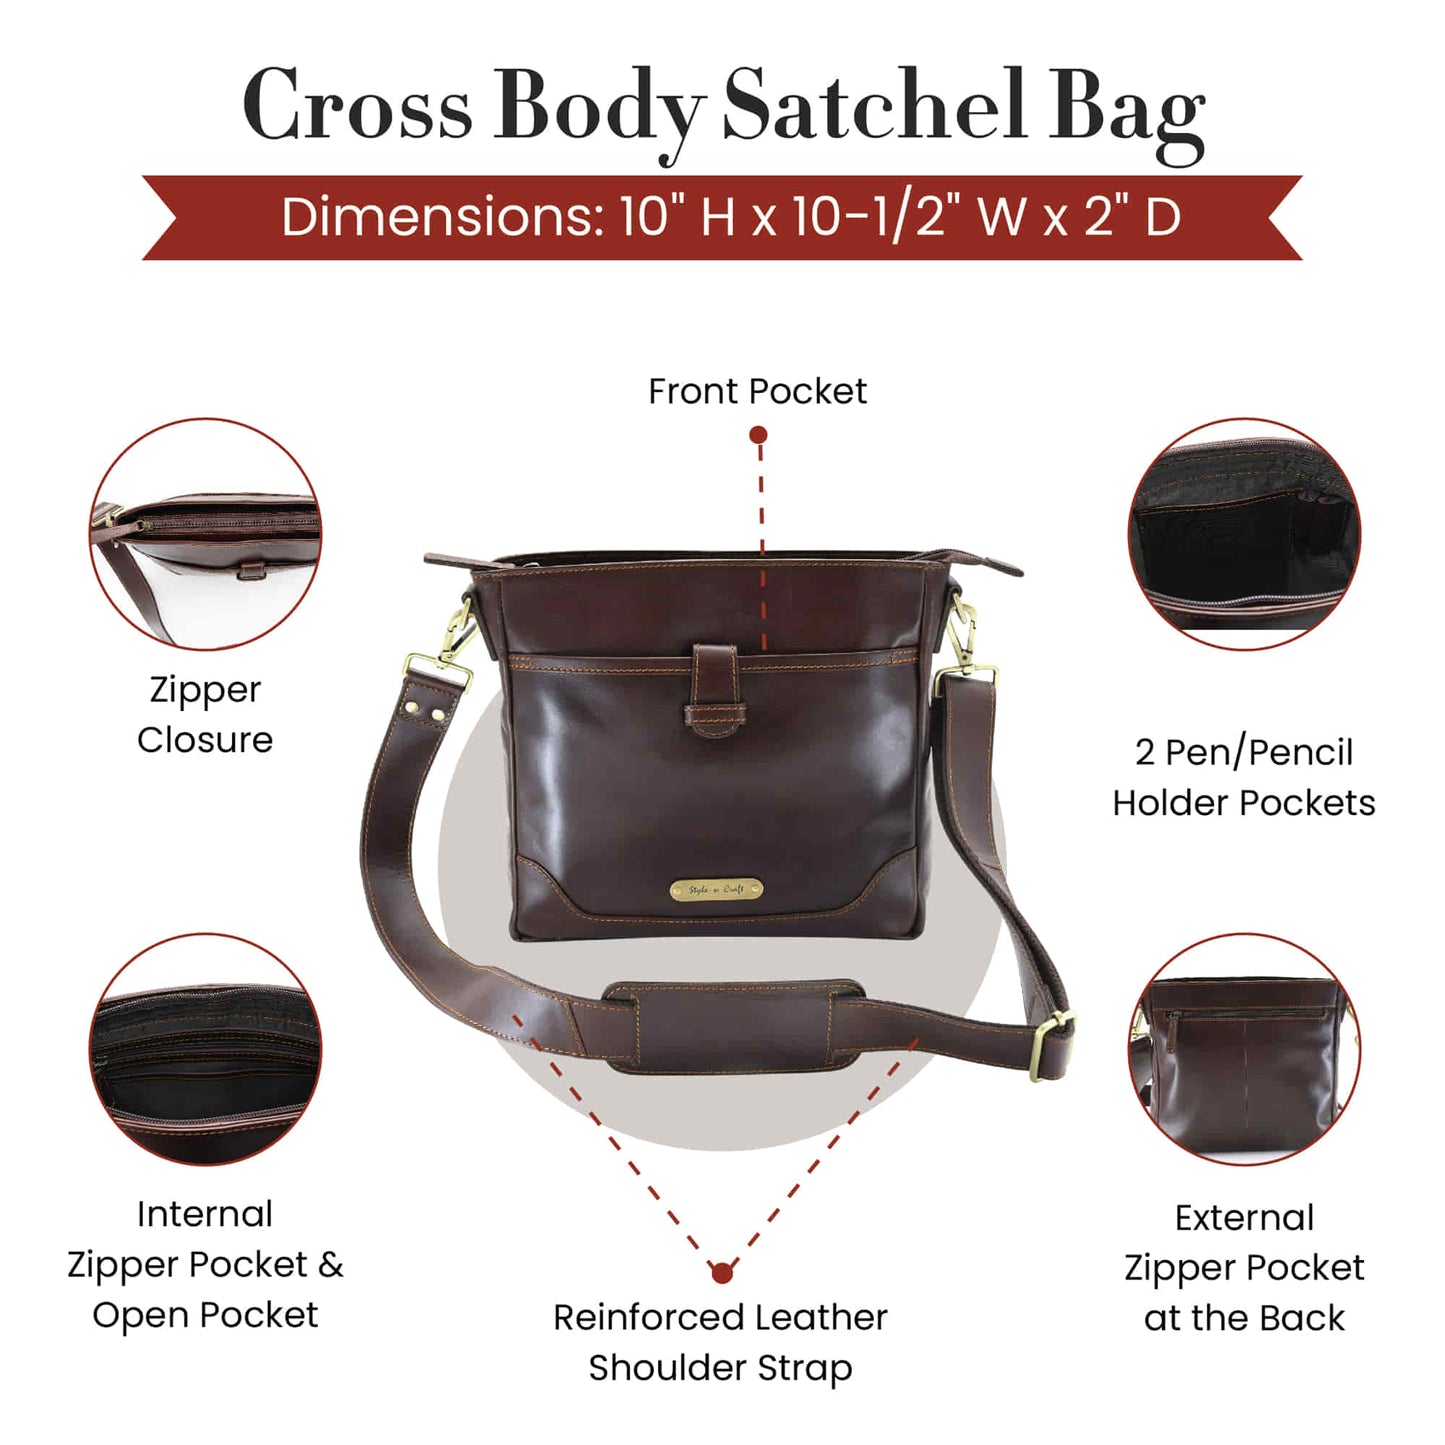 Style n Craft 392001 Cross-body Messenger Bag in Full Grain Dark Brown Leather - Front, Back & Internal Views Showing the Details of the Cross Body Bag